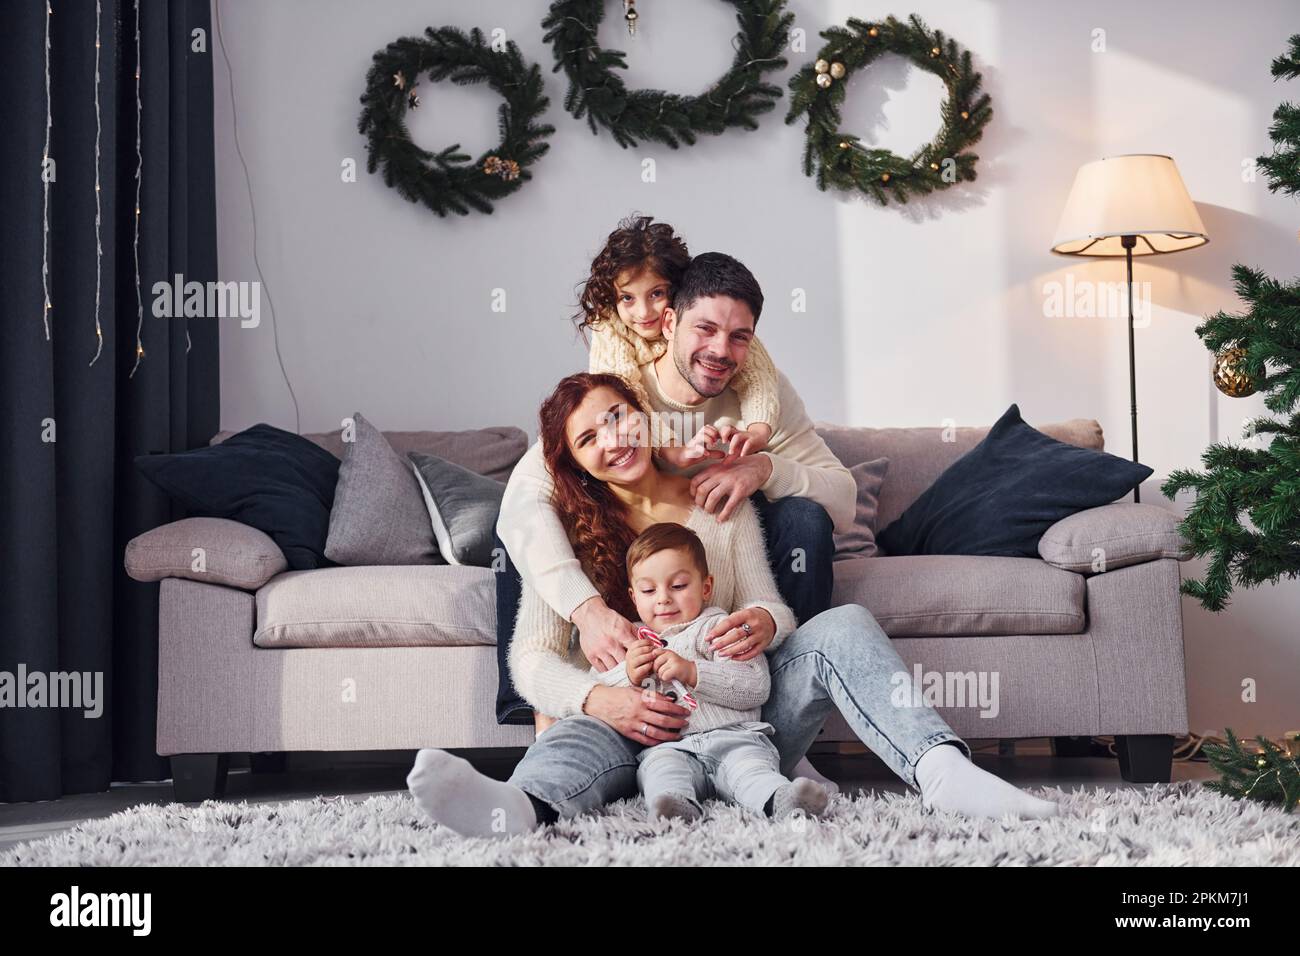 Sitting near sofa. Family celebrating new year with their children at home. Stock Photo